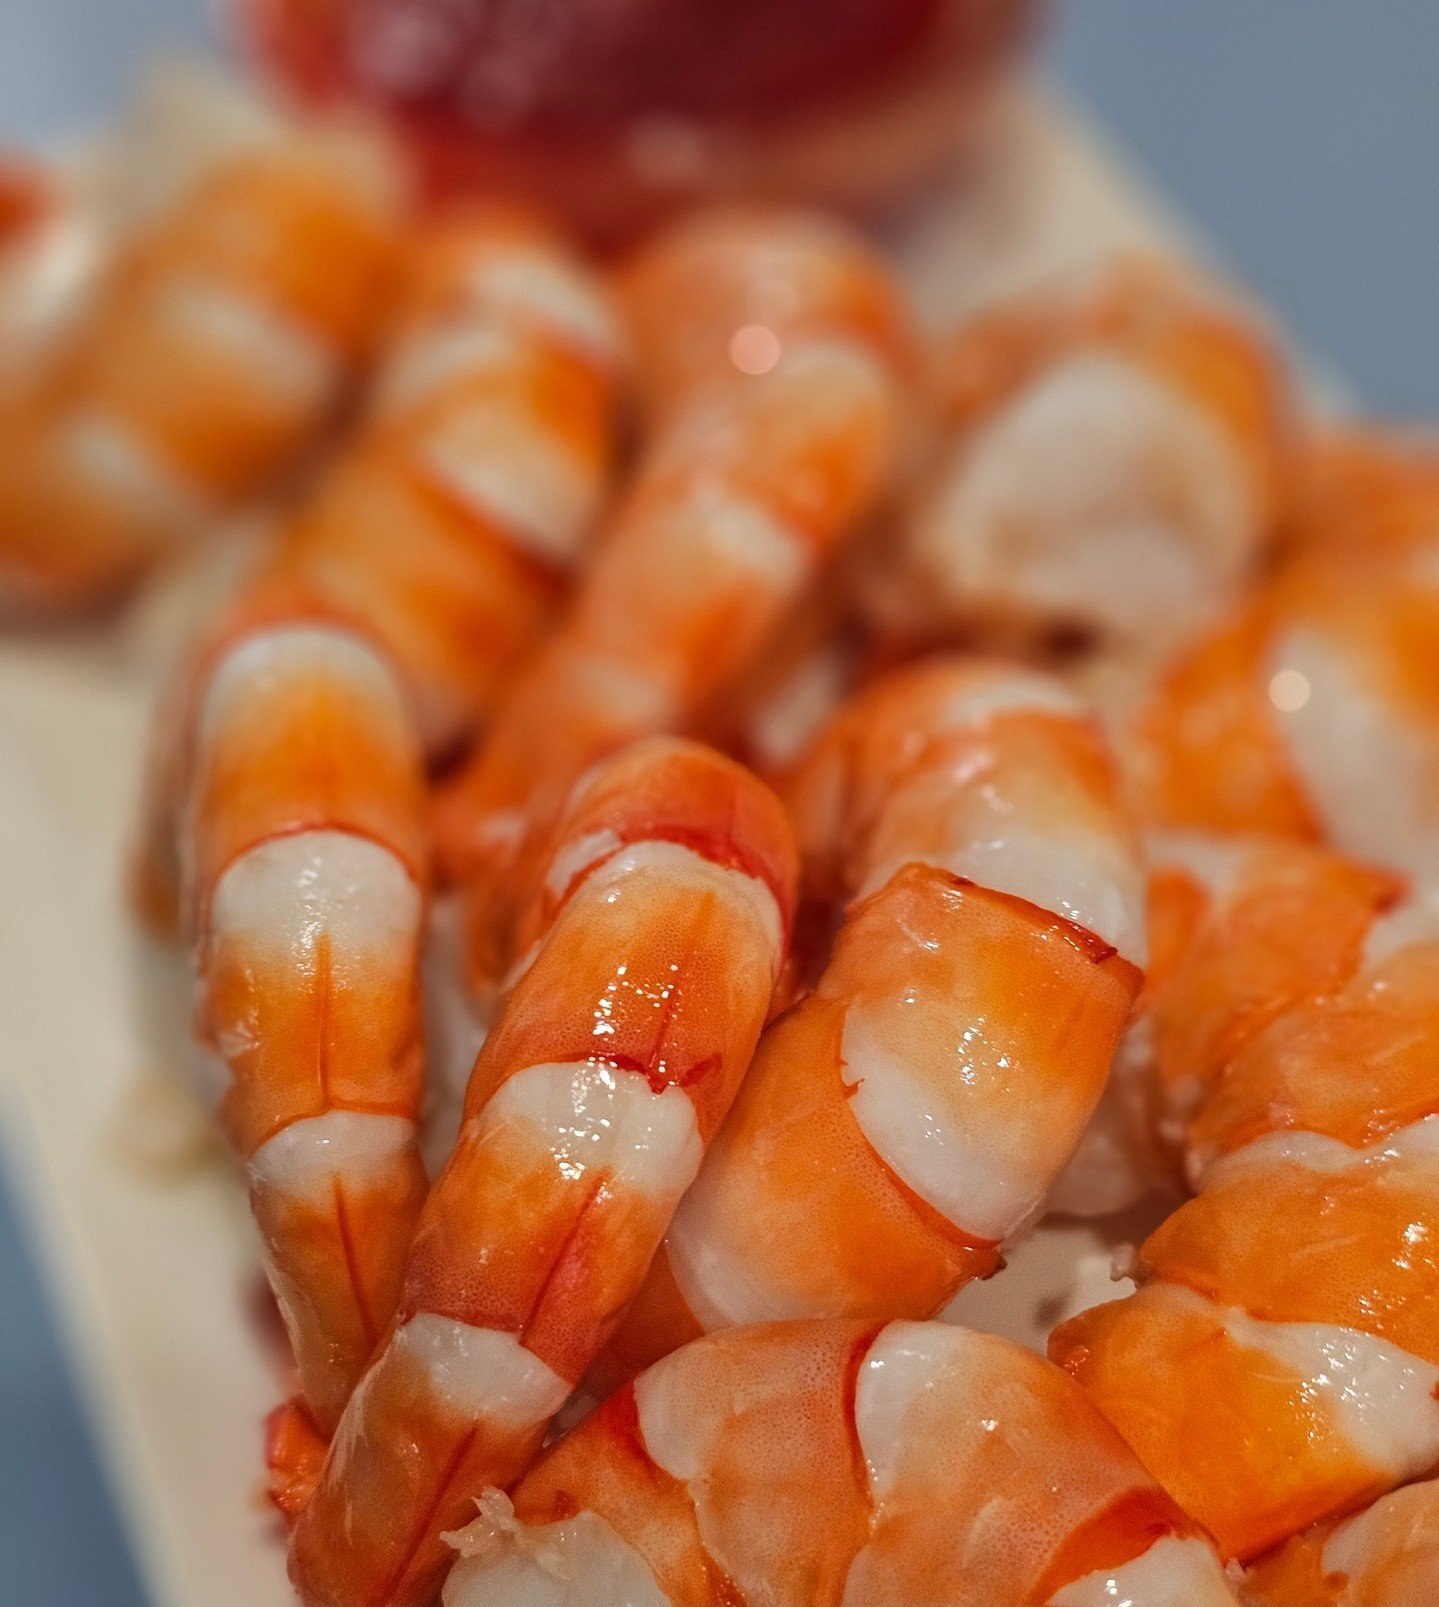 🦐 Dive into a sea of flavors with our exquisite seafood dishes for your next private event! From succulent shrimp cocktails to mouthwatering lobster rolls, we specialize in delivering the freshest seafood delicacies to elevate your dining experience